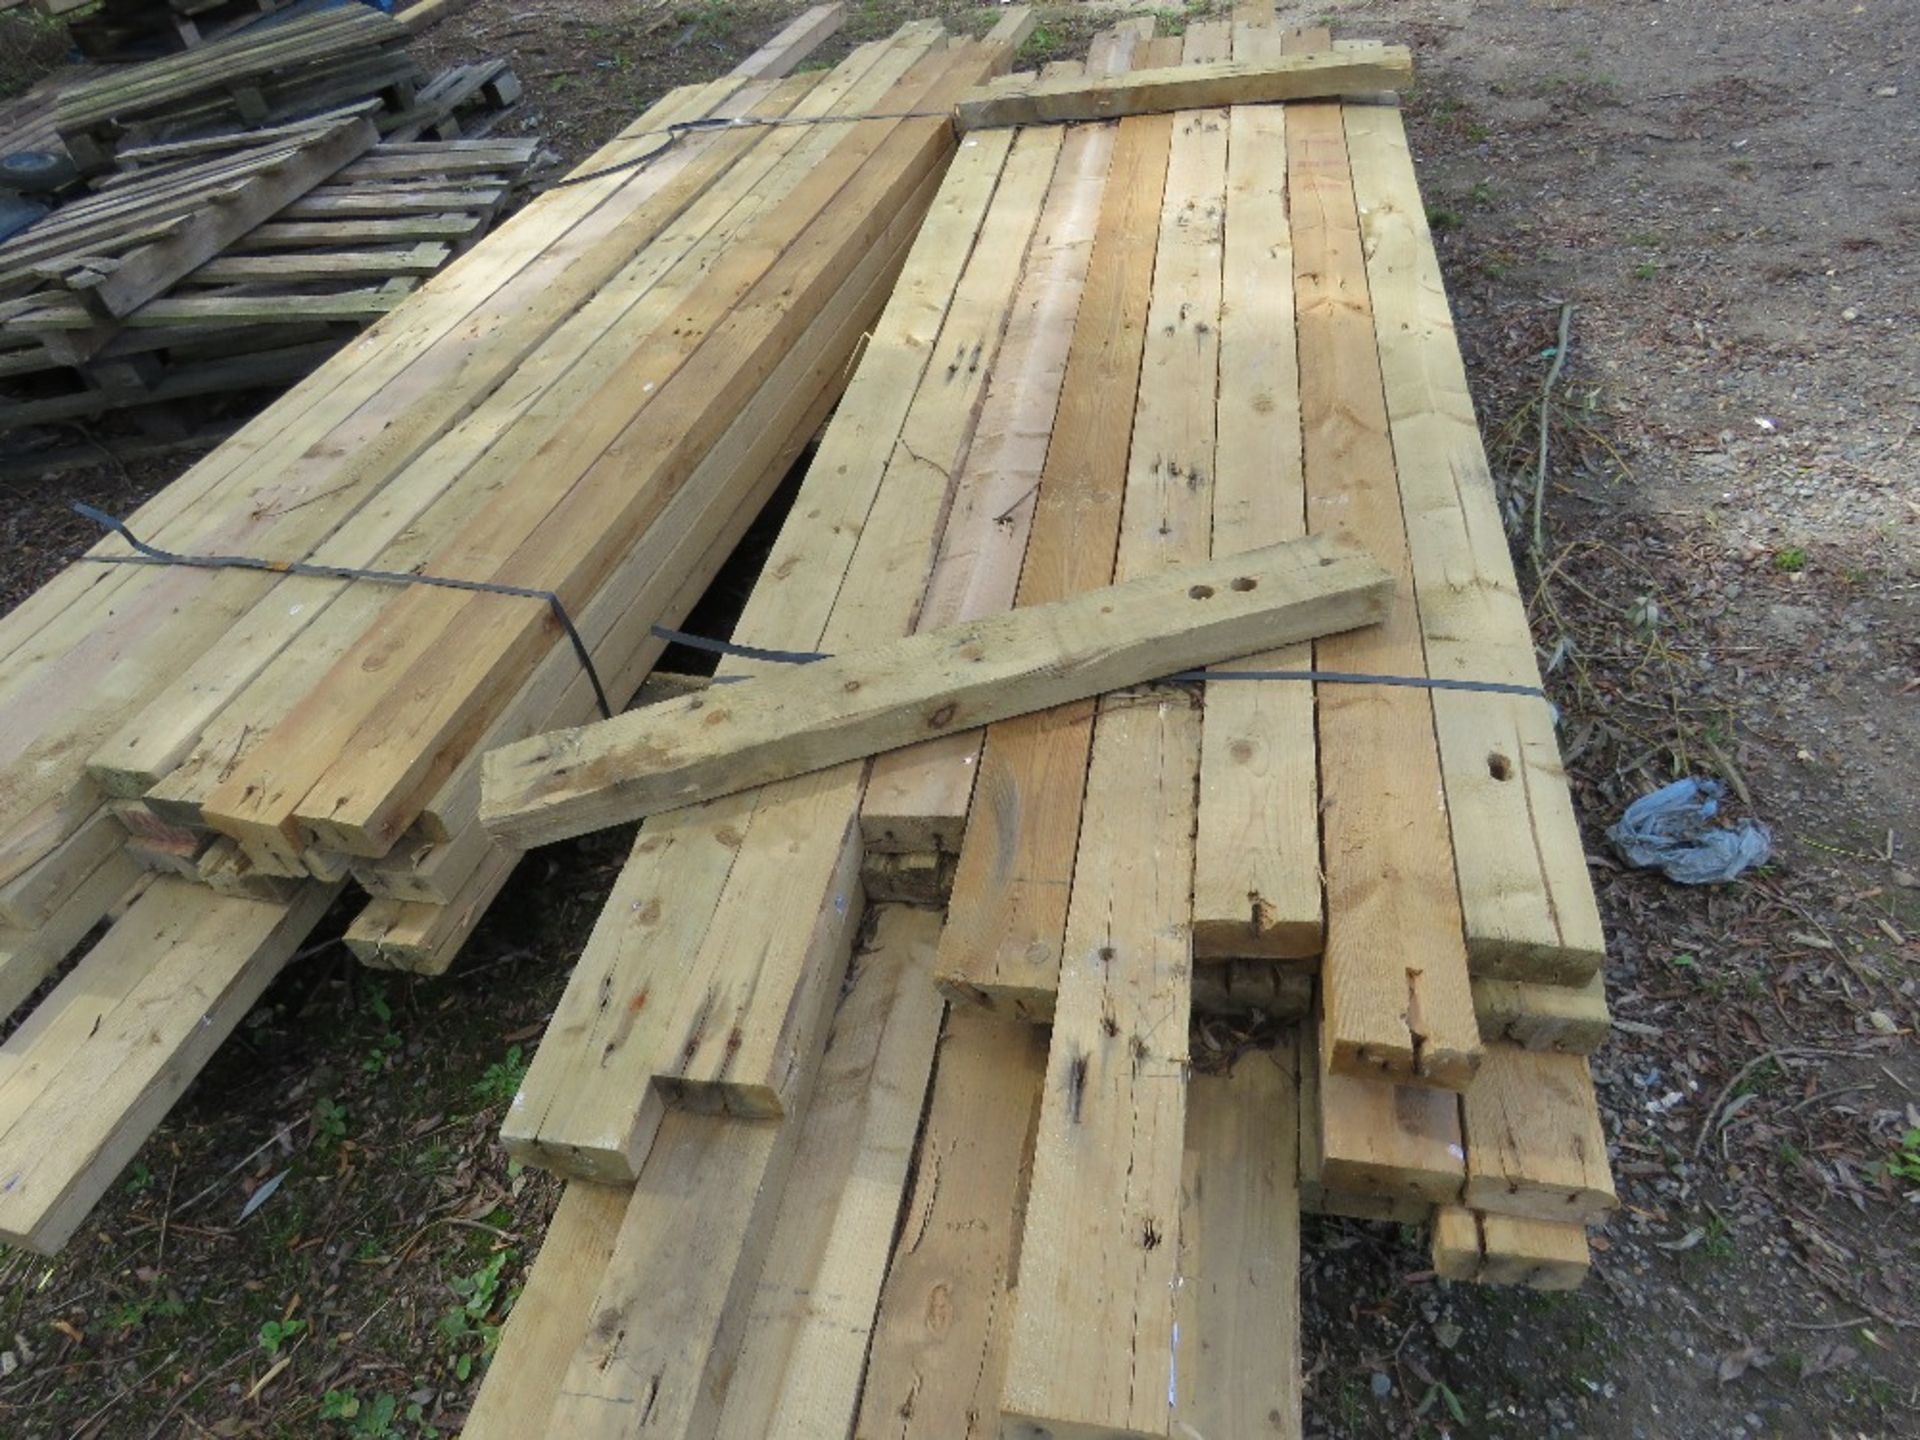 2 X BUNDLES OF PRE USED DE-NAILED 4X2 TIMBER. MAJORITY BEING 2.4-3M LENGTH APPROX. 32 PIECES IN EACH - Image 2 of 3